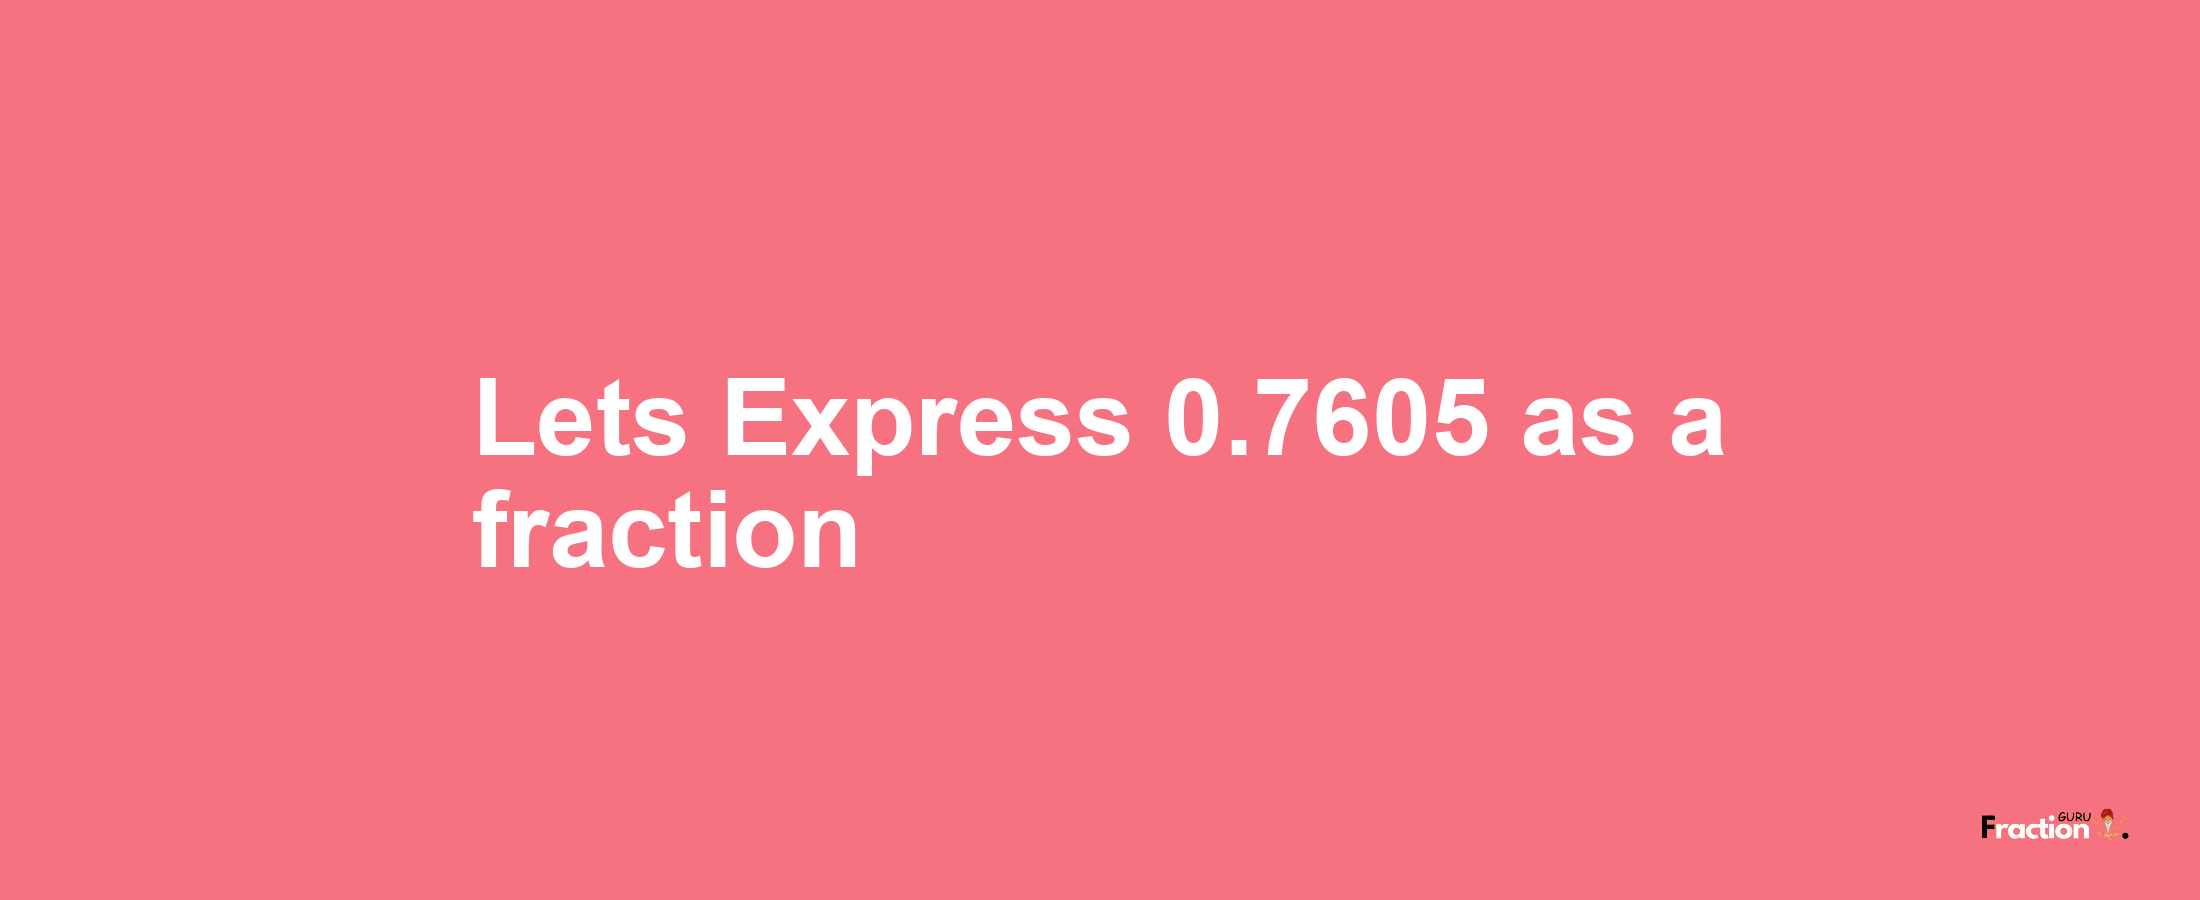 Lets Express 0.7605 as afraction